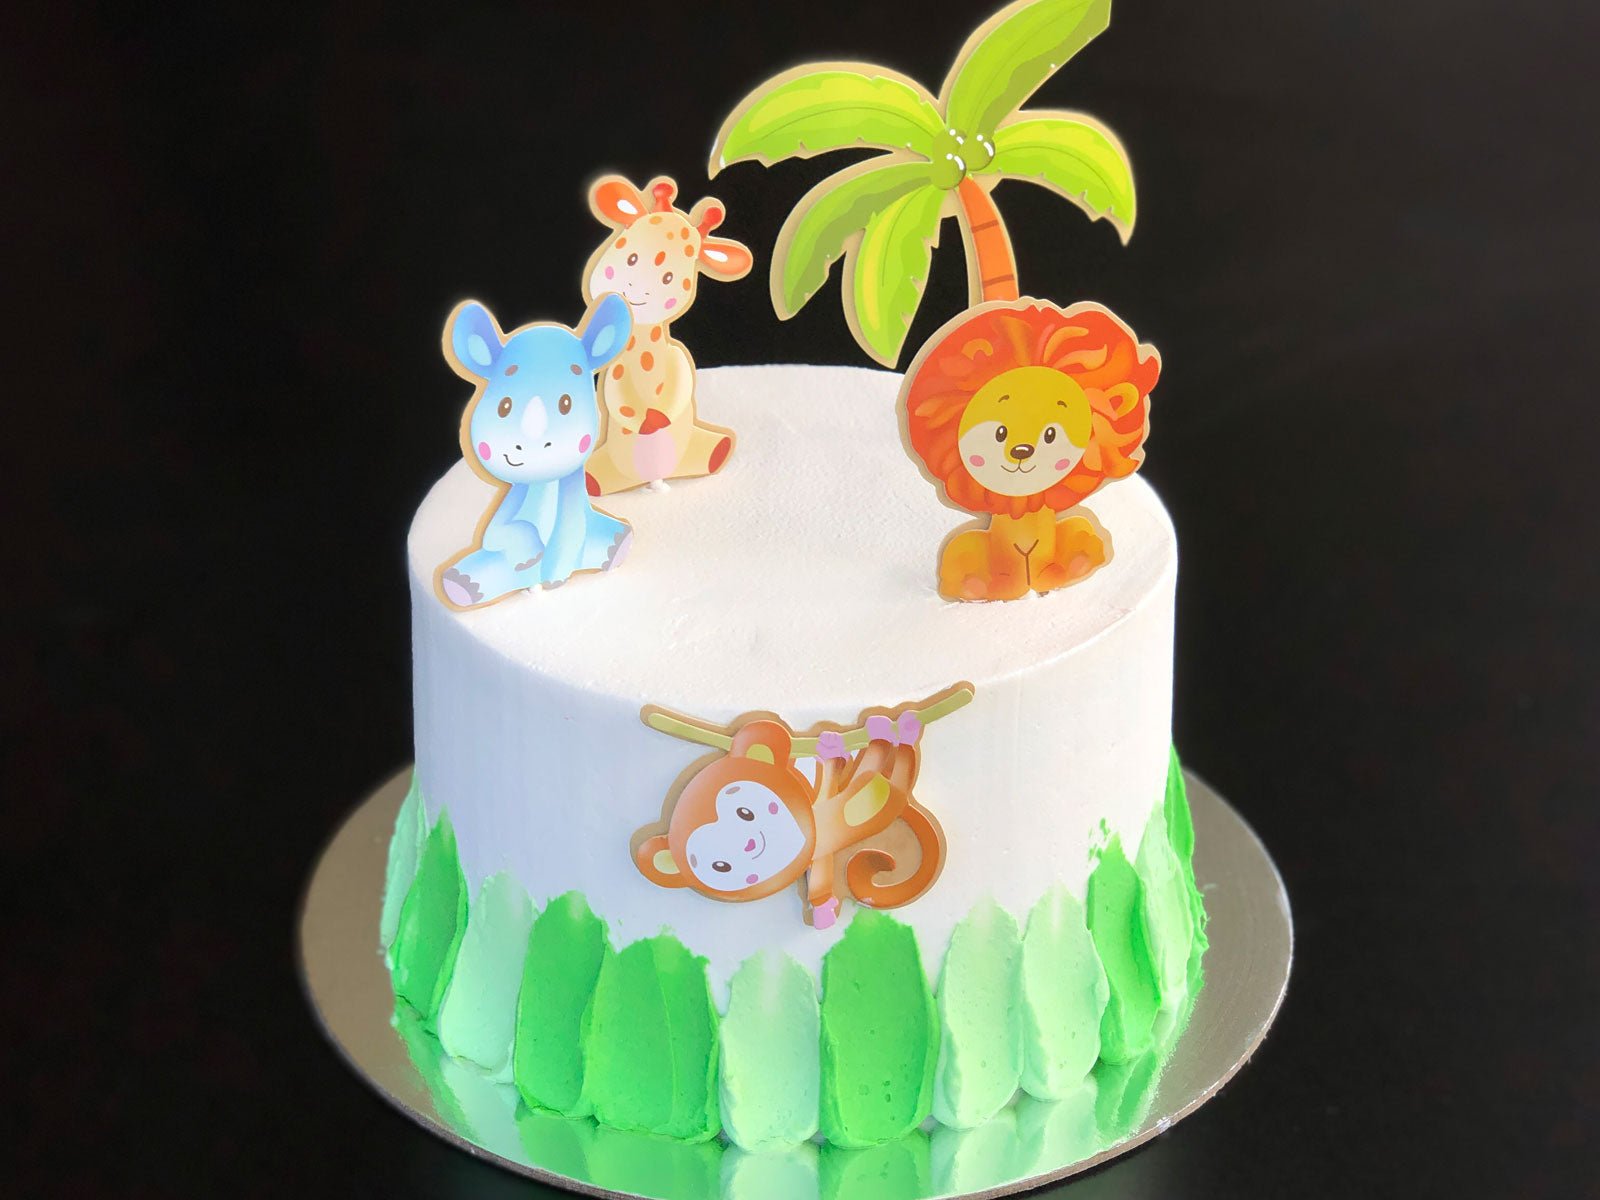 Birthday Cake With Baby Animal Theme - CakeCentral.com